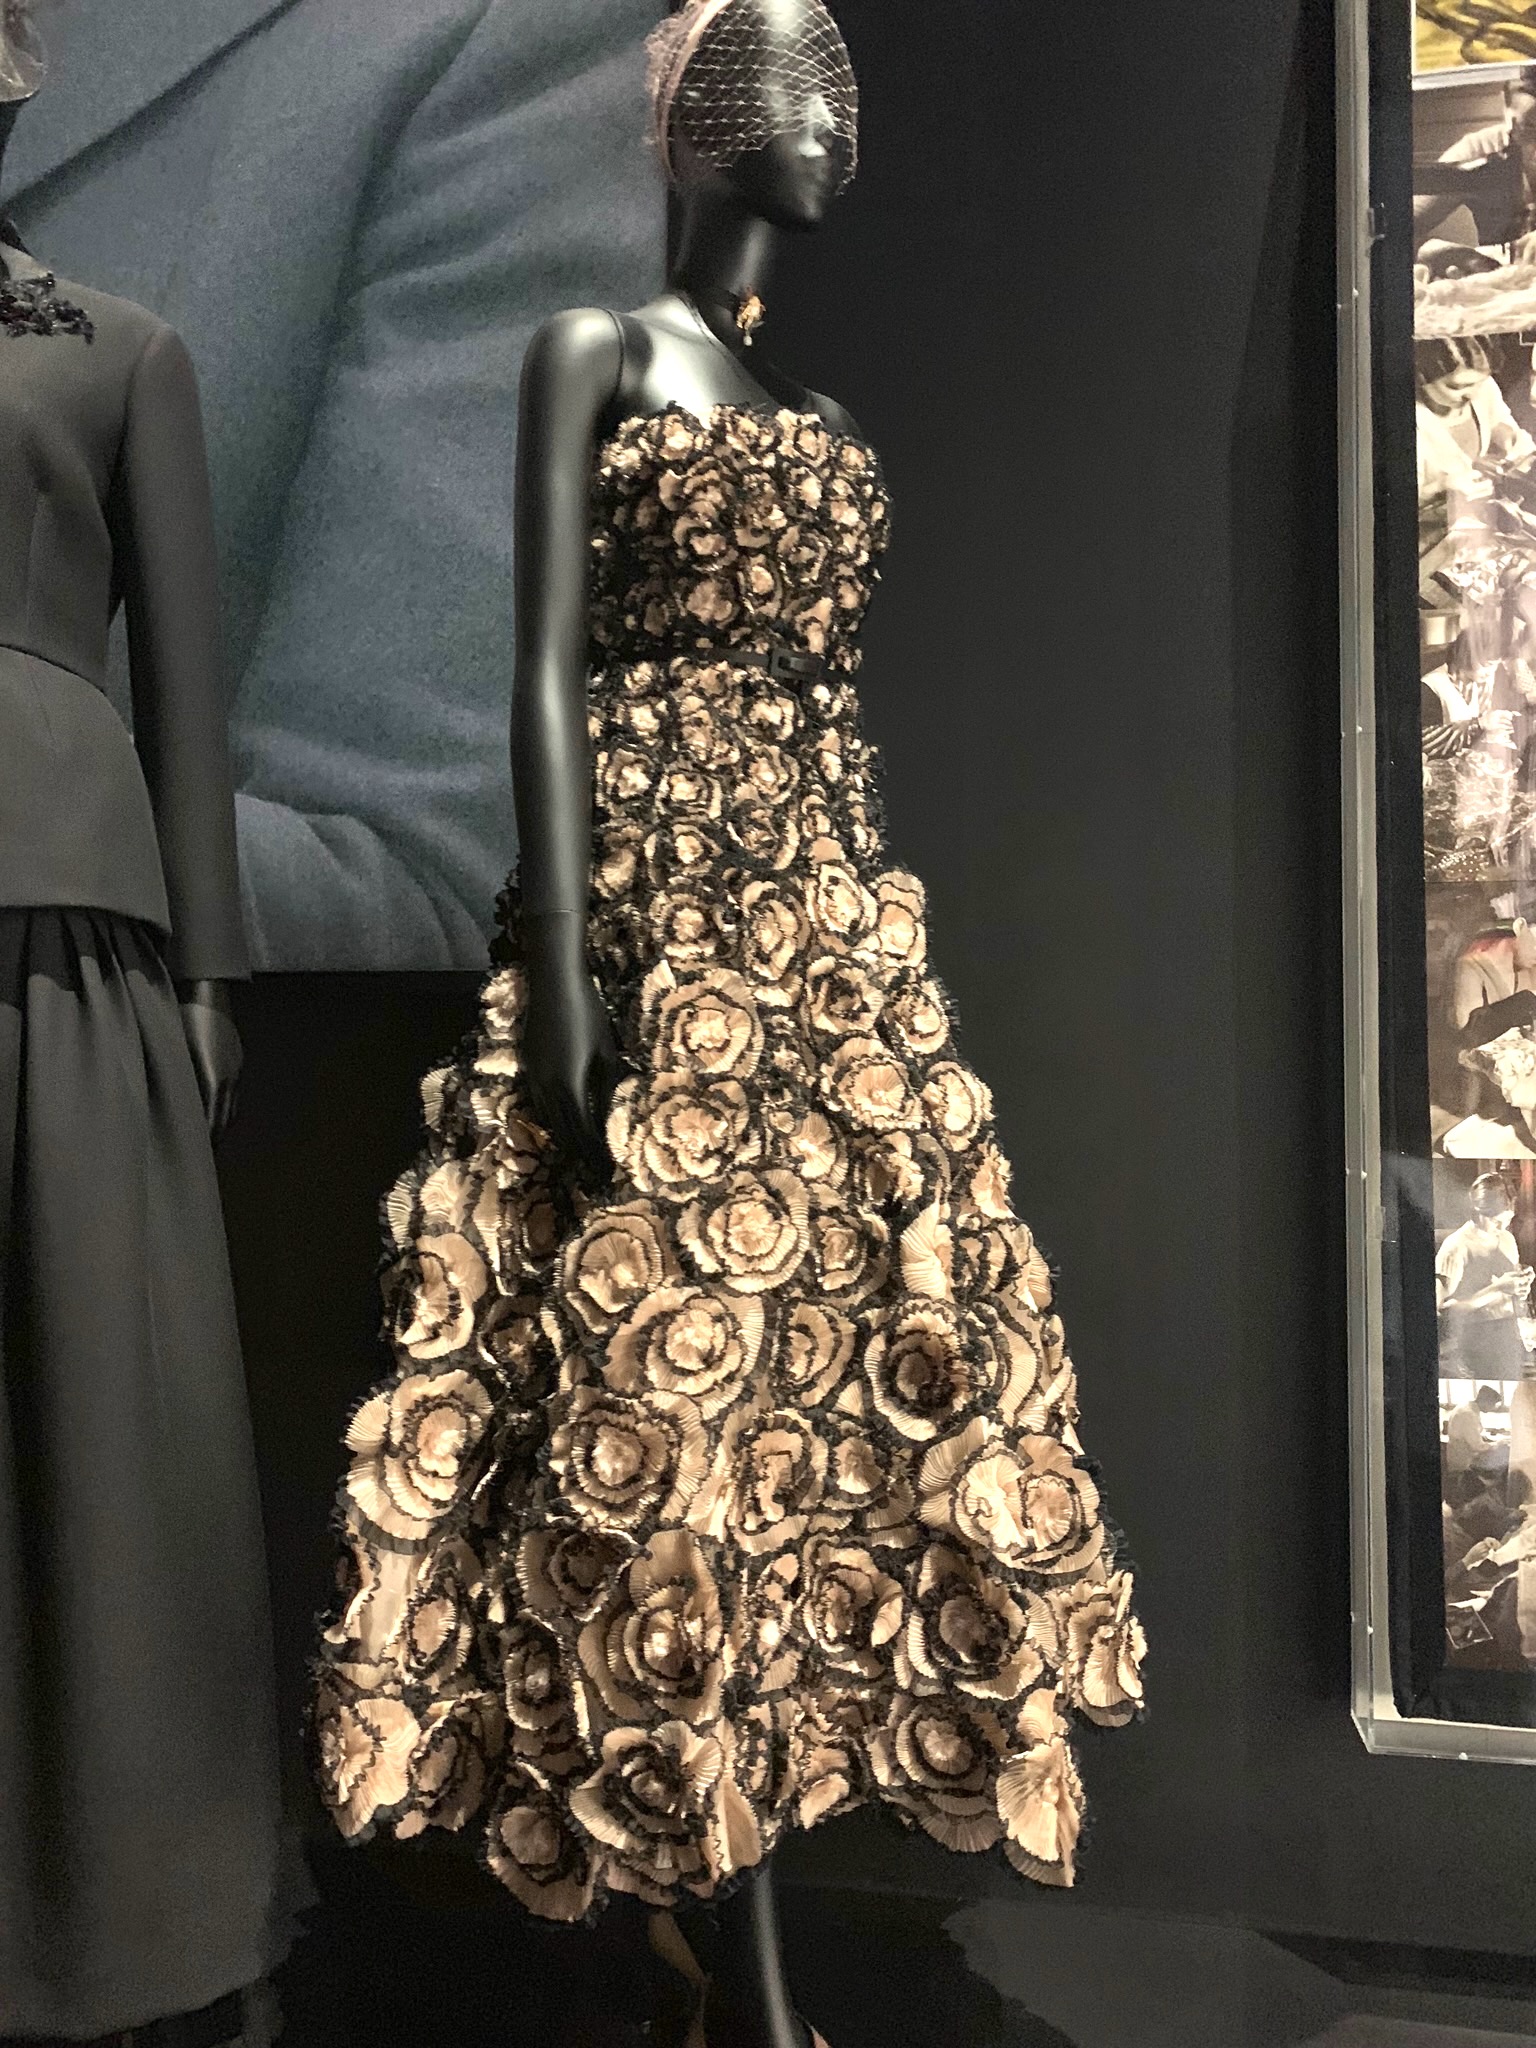 Christian Dior, Evening dress, “Junon”, 1949. Silk tulle embroidered with  sequins with silk faille inner skirt; horsehair stiffening. Gift of I.  Magnin & Company, 1949. 49.25.2a-b | De Young Museum